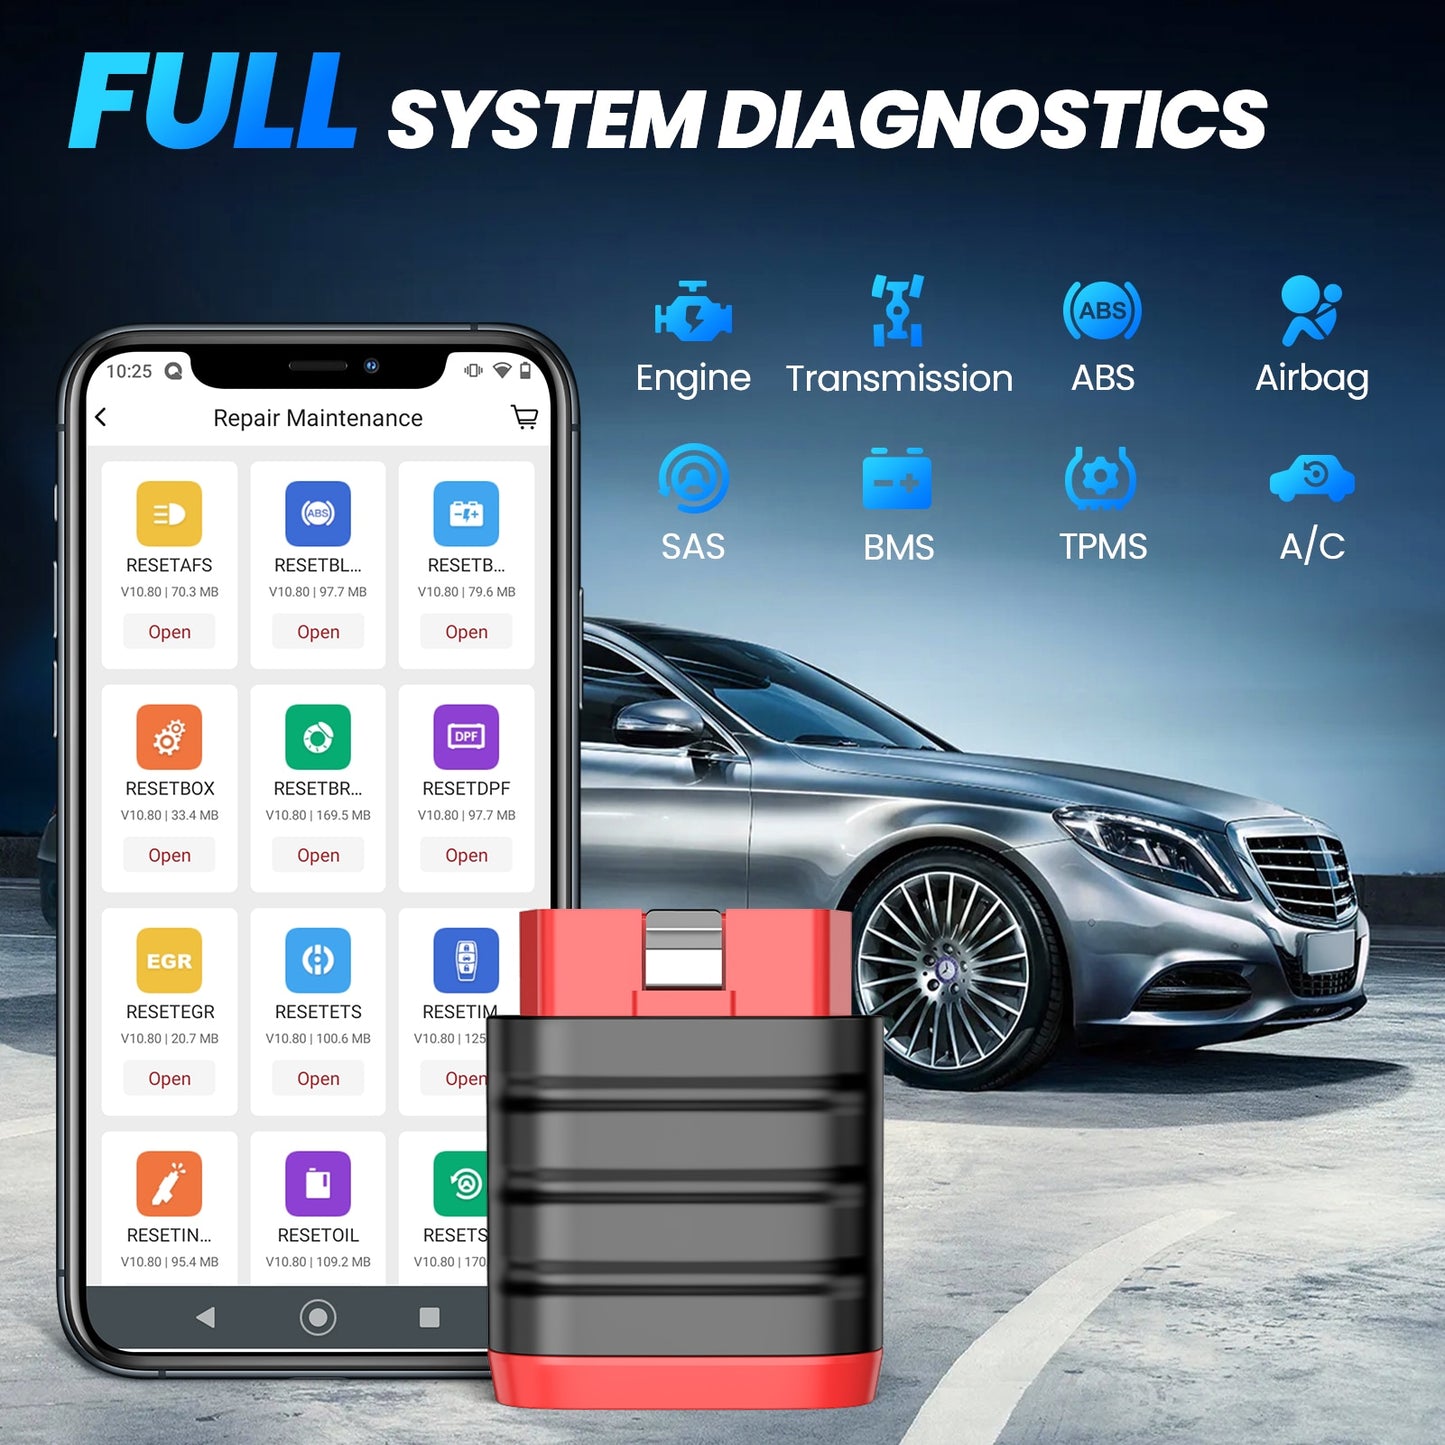 New THINKCAR THINKDIAG Mini Auto Diagnostic Tool All Cars Full System Diagnose Lifetime Free OBD2 Scanner Read/Clear Code Error